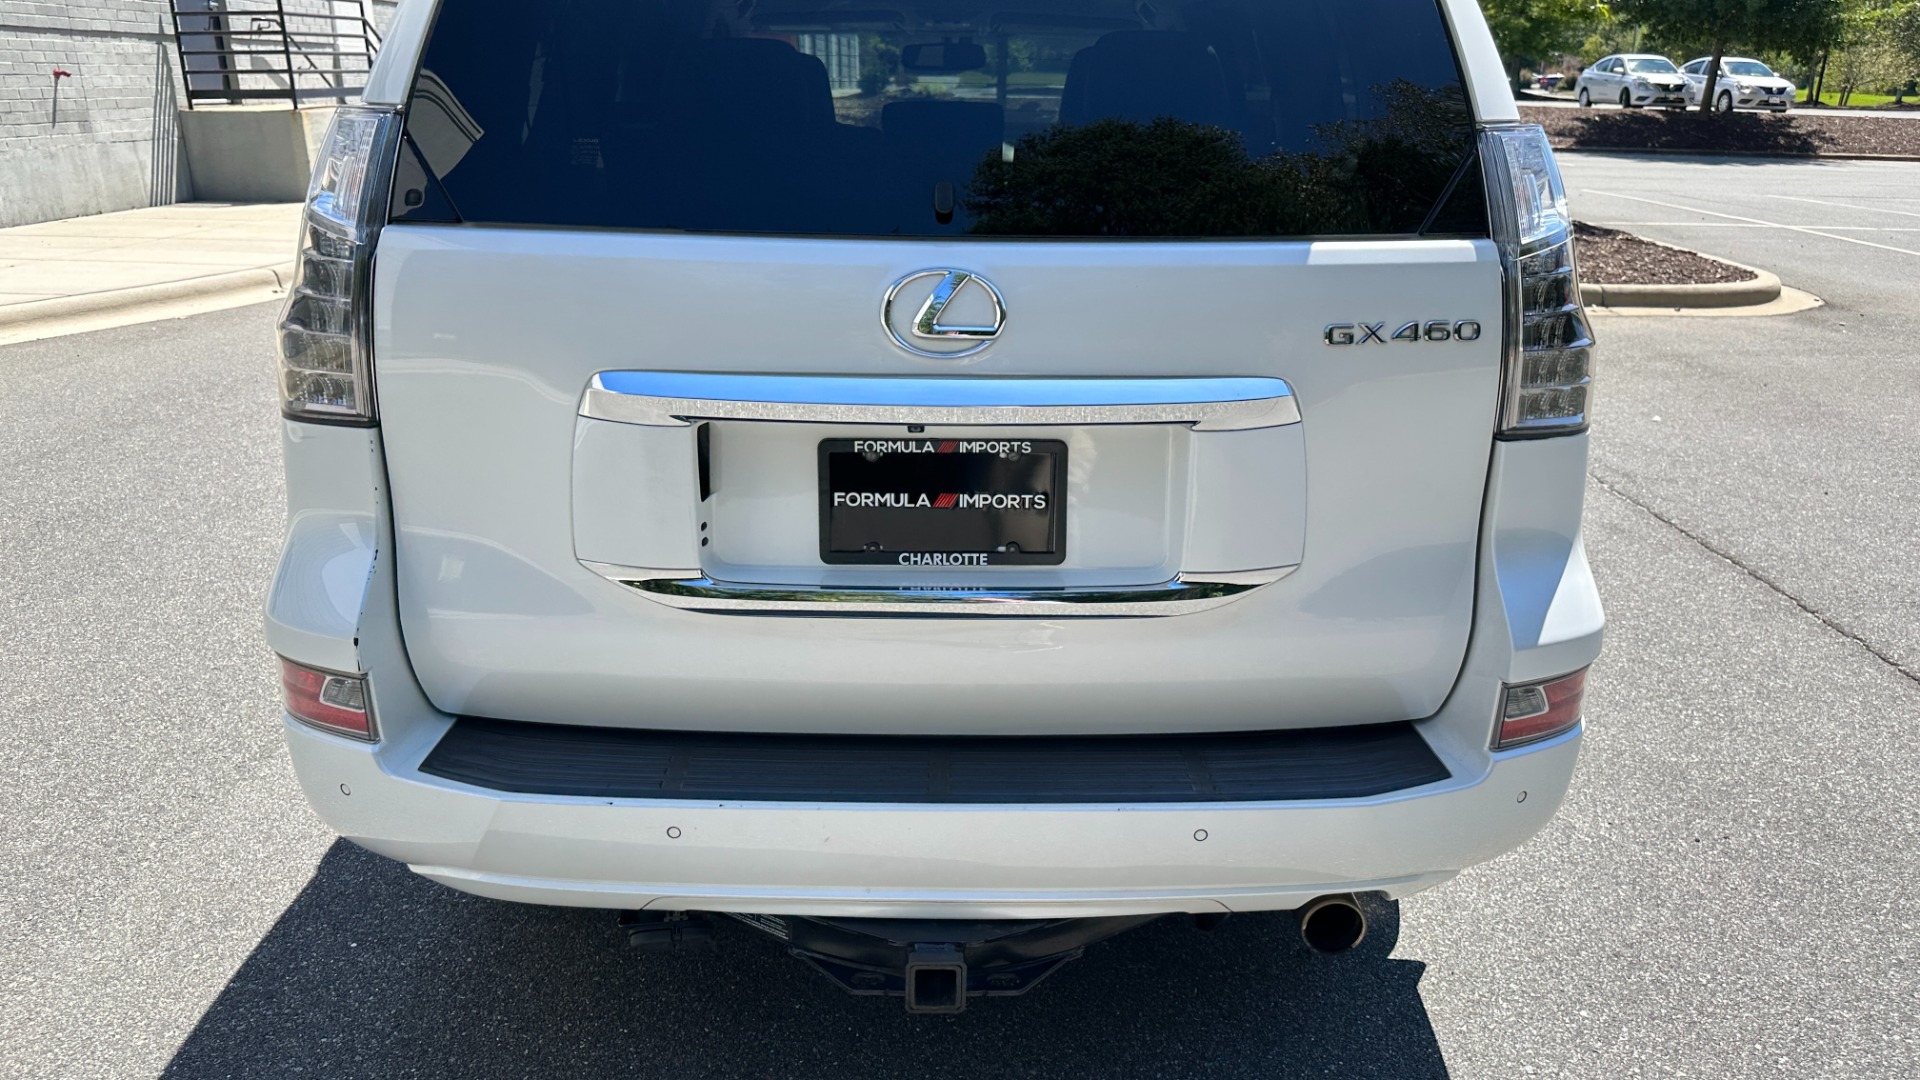 Used 2015 Lexus GX 460 LUXURY / MARK LEVINSON / ADJUSTABLE SUSPENSION / TOW HITCH / 3RD ROW for sale Sold at Formula Imports in Charlotte NC 28227 6